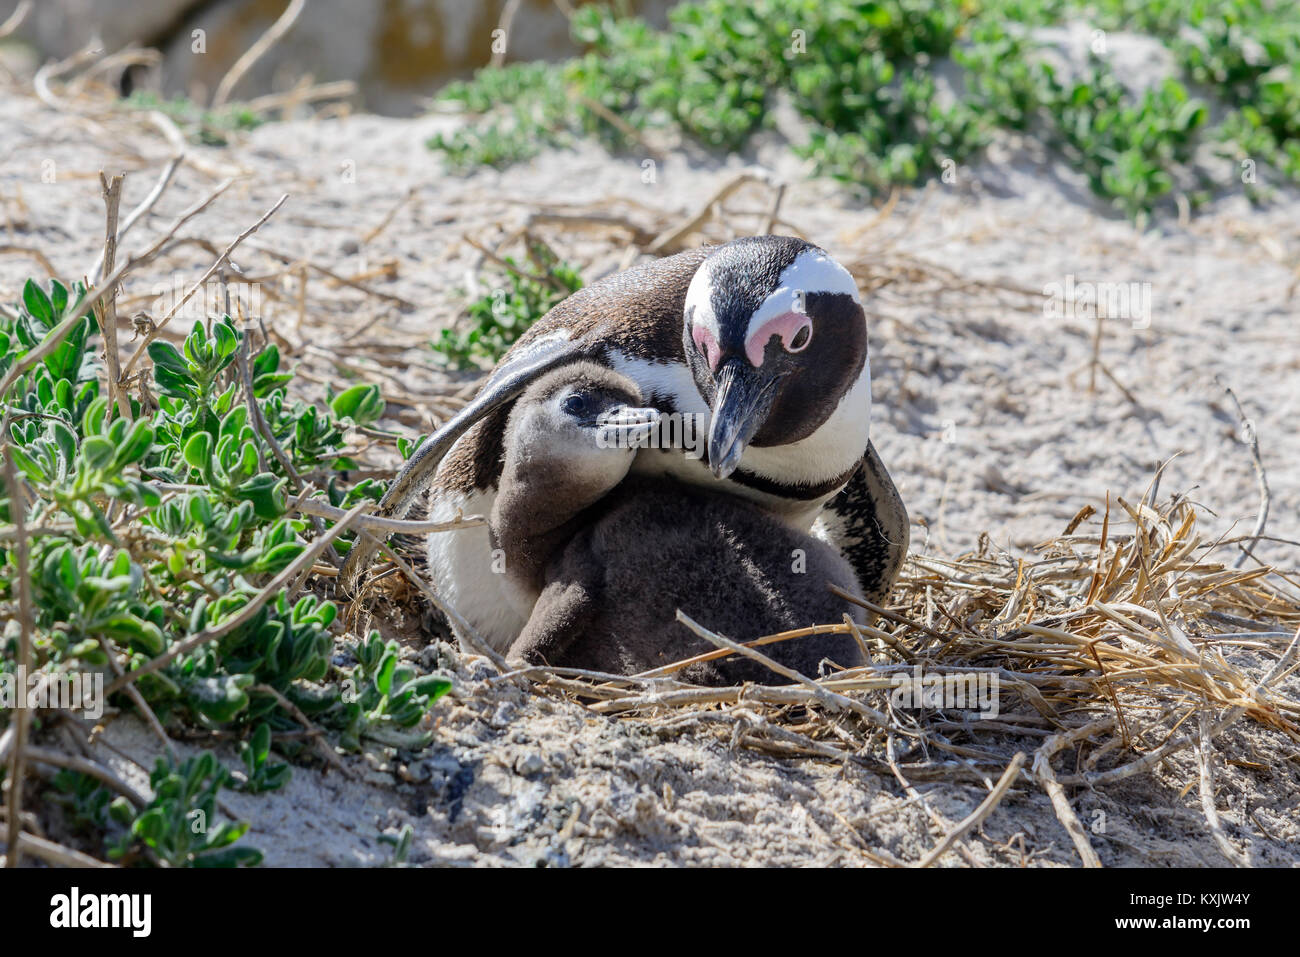 African penguins doing brood care, Spheniscus demersus, Boulders Beach or Boulders Bay, Simons Town, South Africa, Indian Ocean Stock Photo